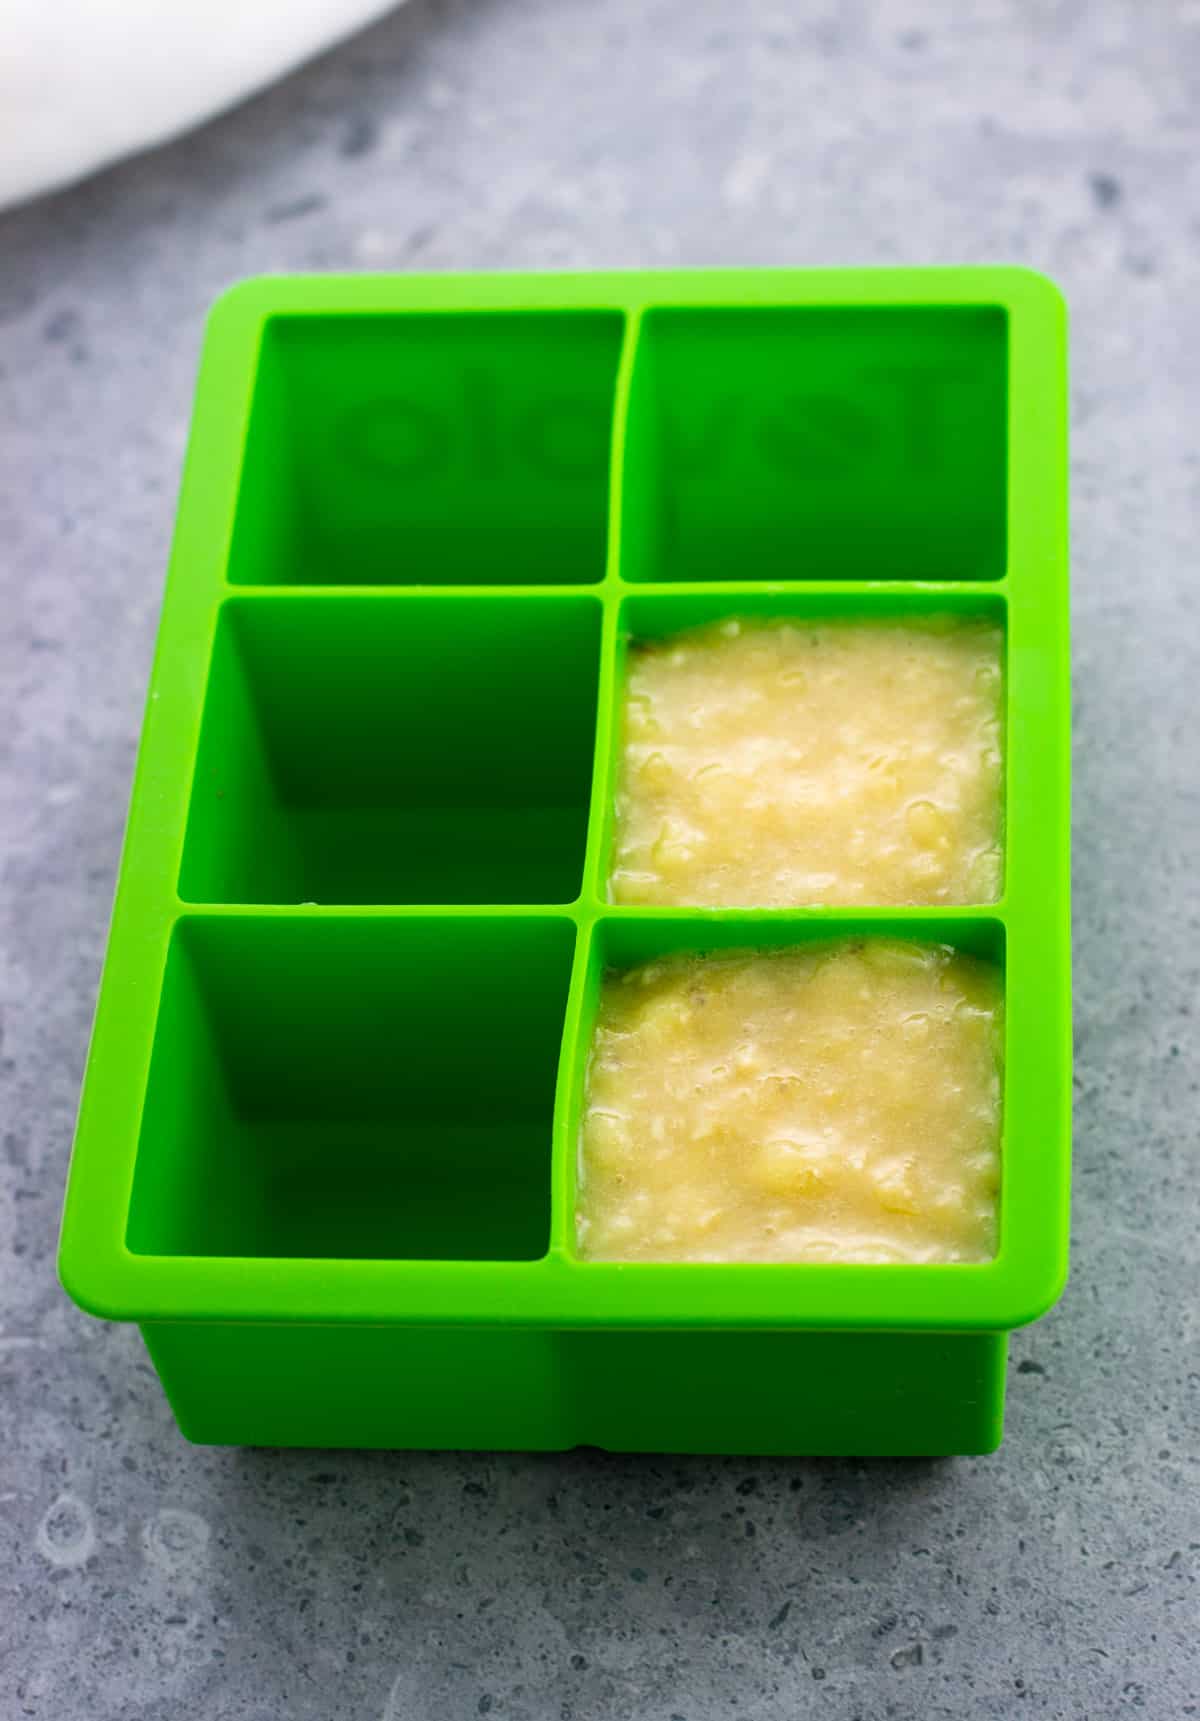 Two wells of a large silicone ice cube tray filled with banana puree.